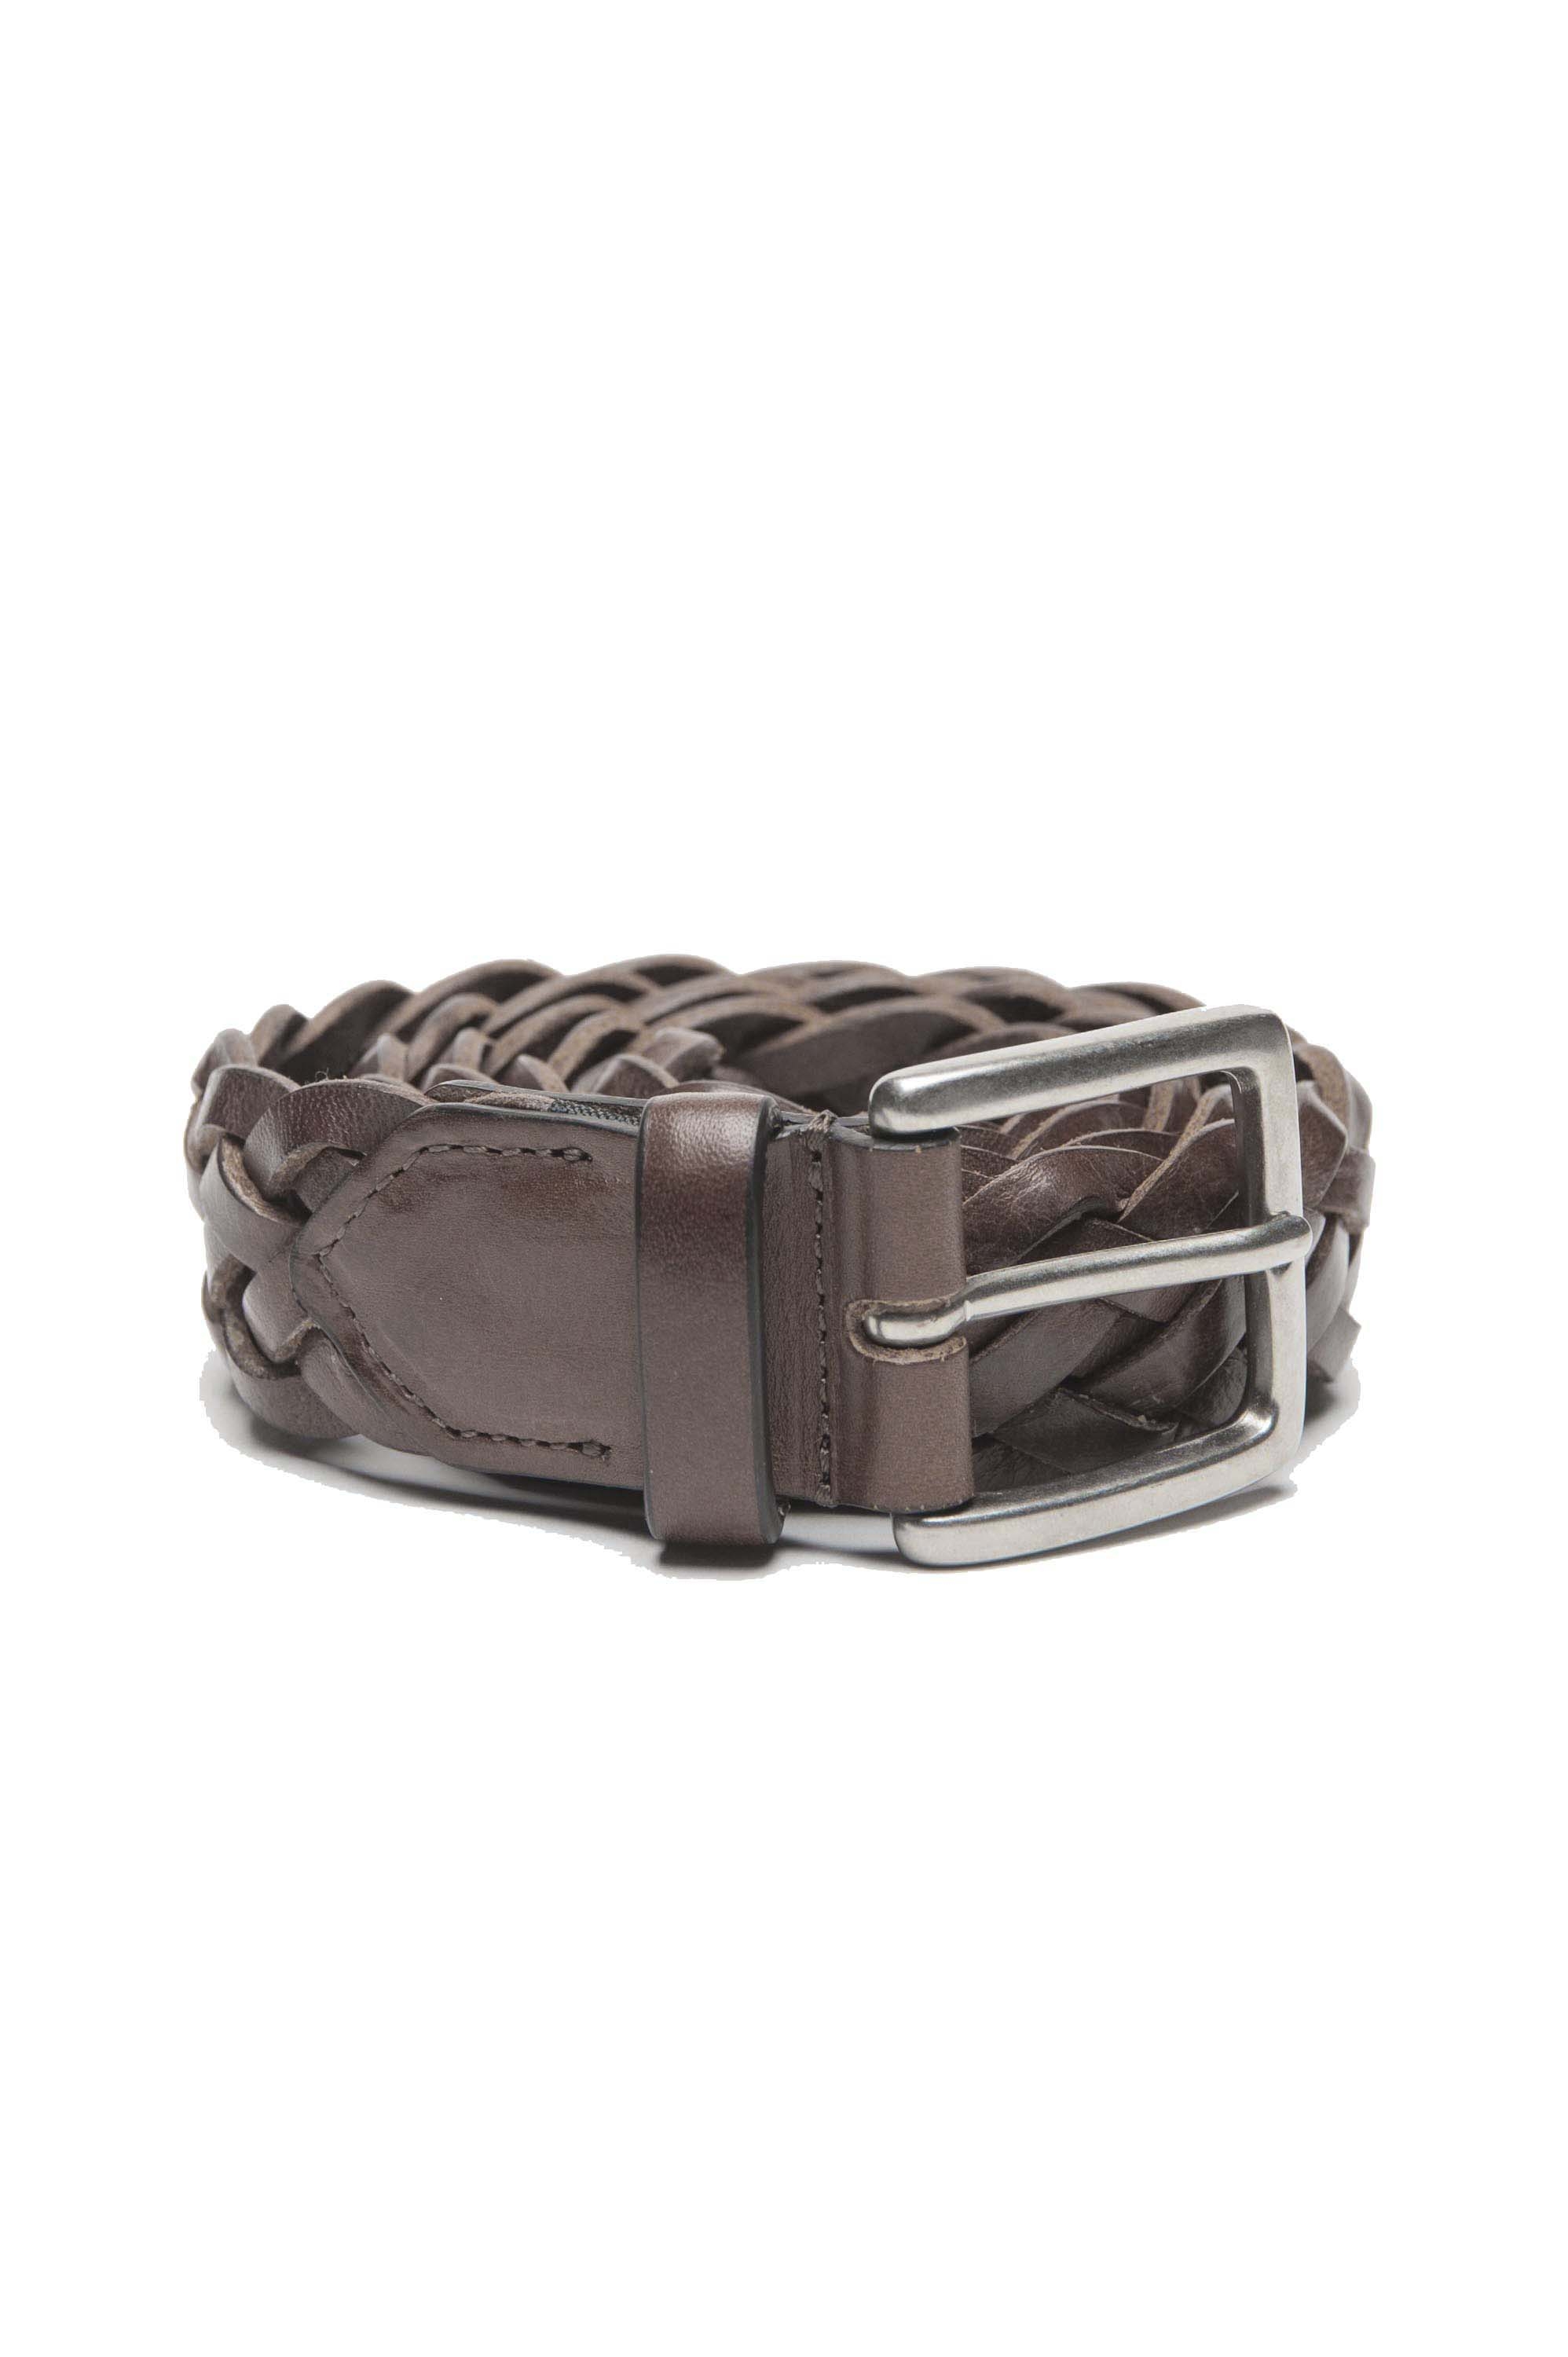 SBU 01236_19AW Classic belt in brown calfskin leather 1.2 inches 01